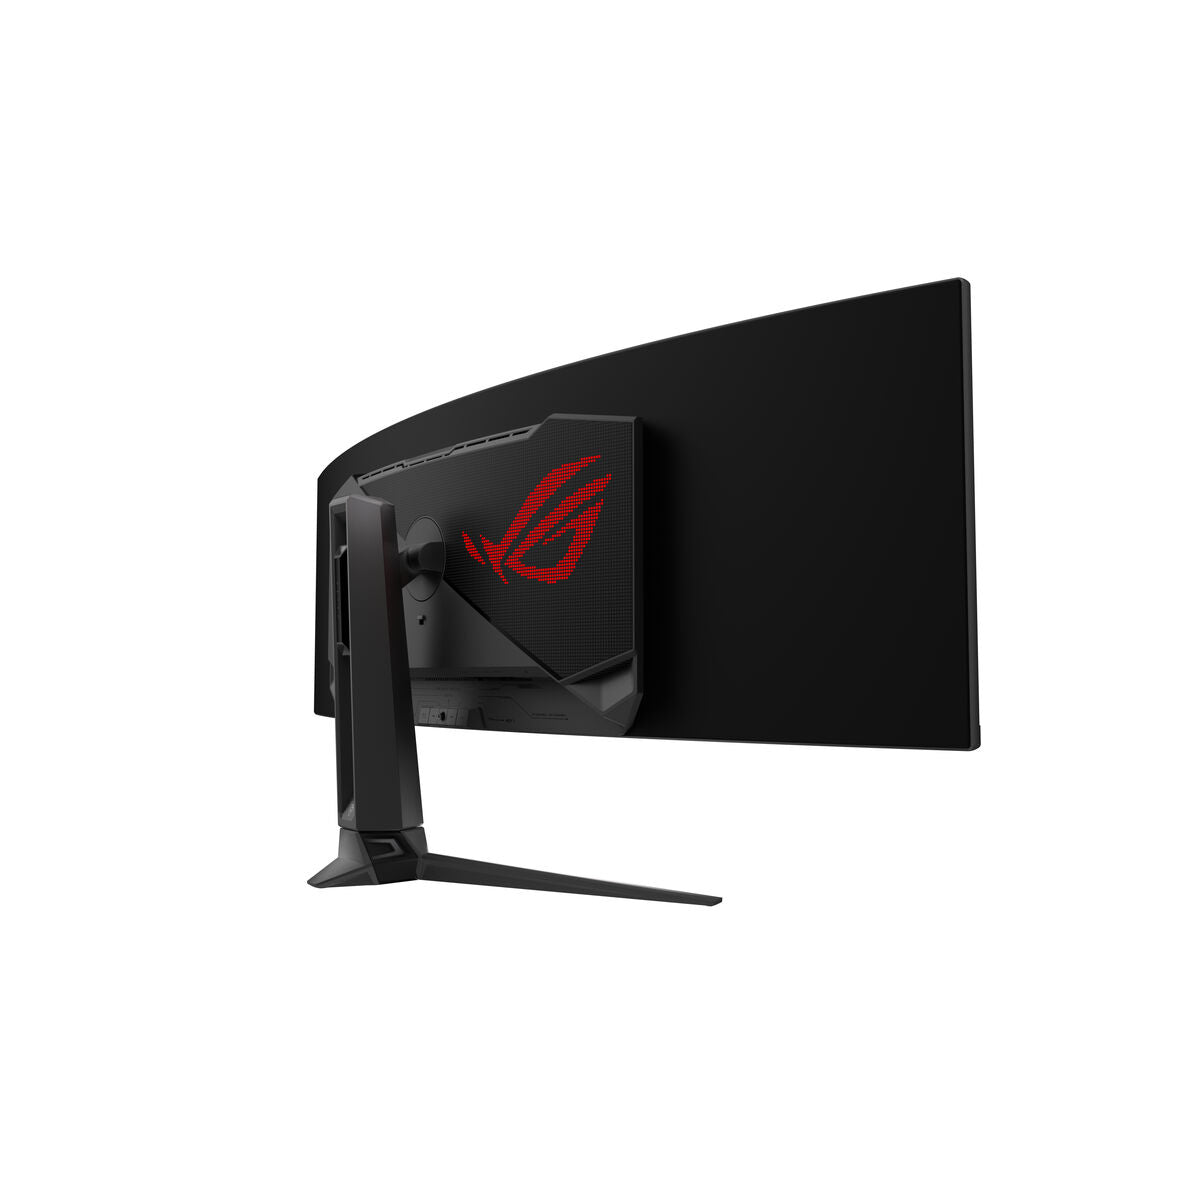 Monitor Asus PG49WCD 49", Asus, Computing, monitor-asus-pg49wcd, :NVIDIA G-SYNC, Brand_Asus, category-reference-2609, category-reference-2642, category-reference-2644, category-reference-t-19685, category-reference-t-19902, computers / peripherals, Condition_NEW, office, Price_+ 1000, Teleworking, RiotNook